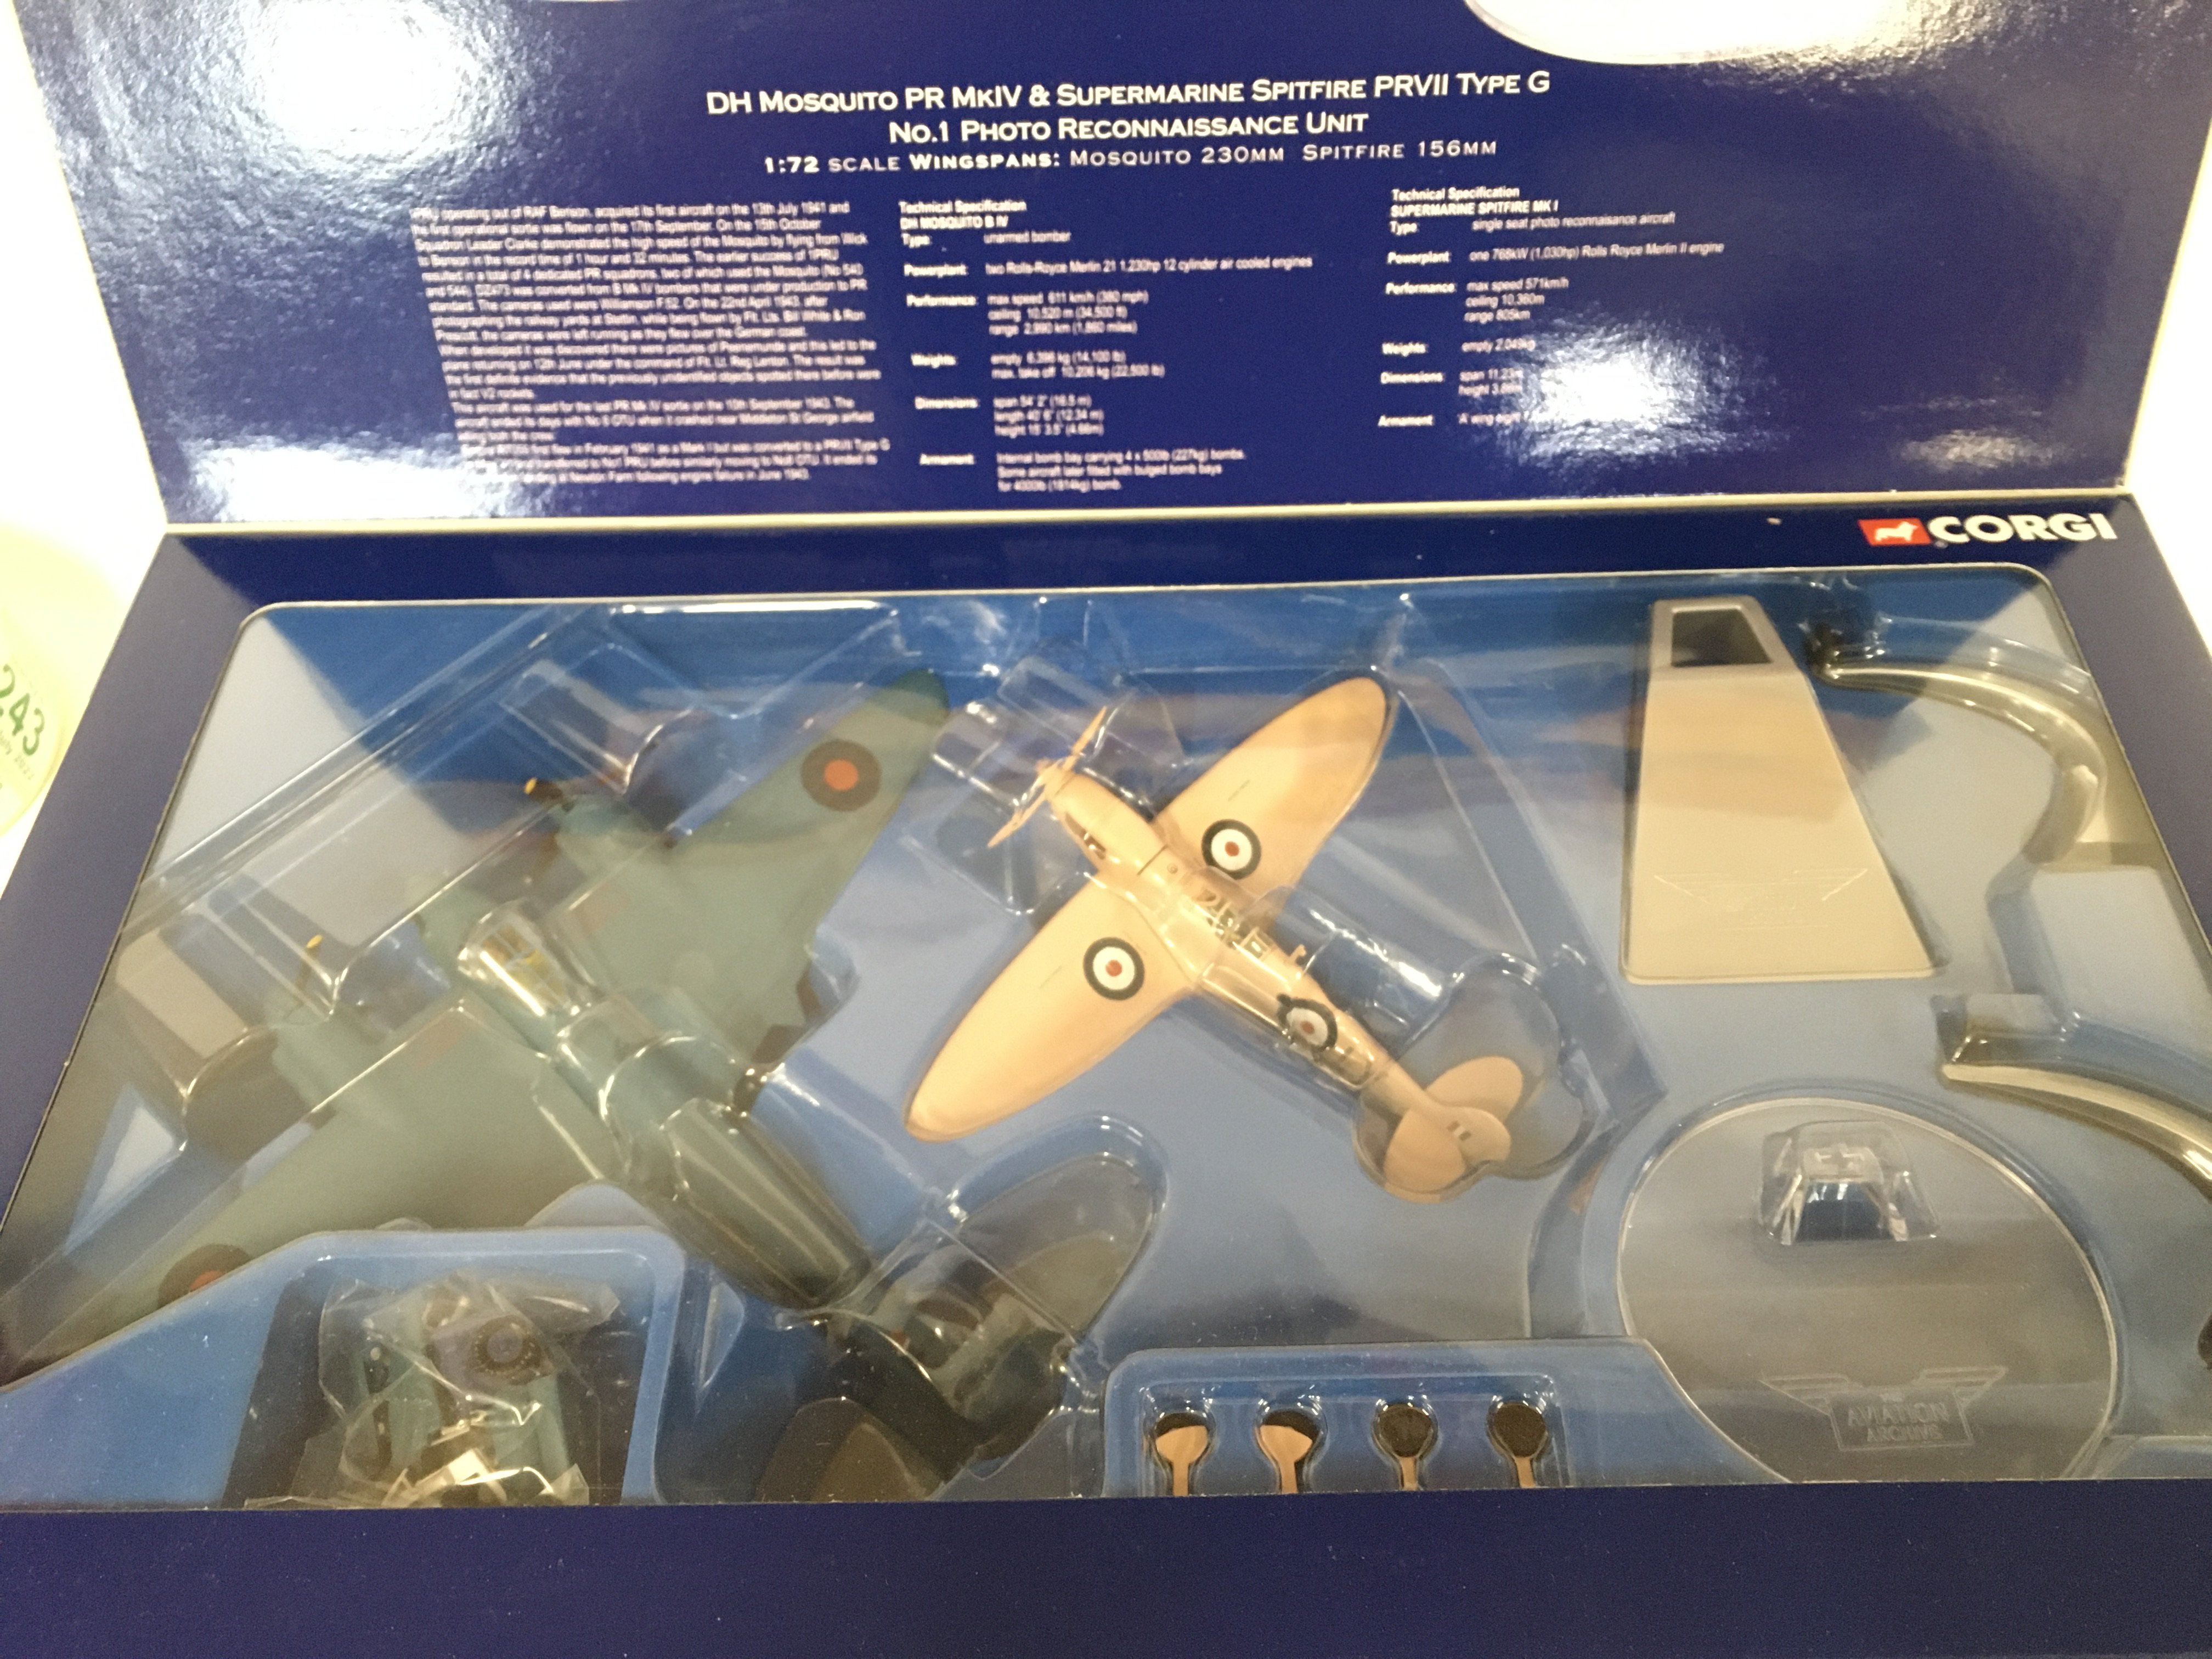 A Boxed Corgi DH Mosquito PR MkIV & Supermarine Spitfire PRVII Type G. #AA99110. - Image 2 of 2